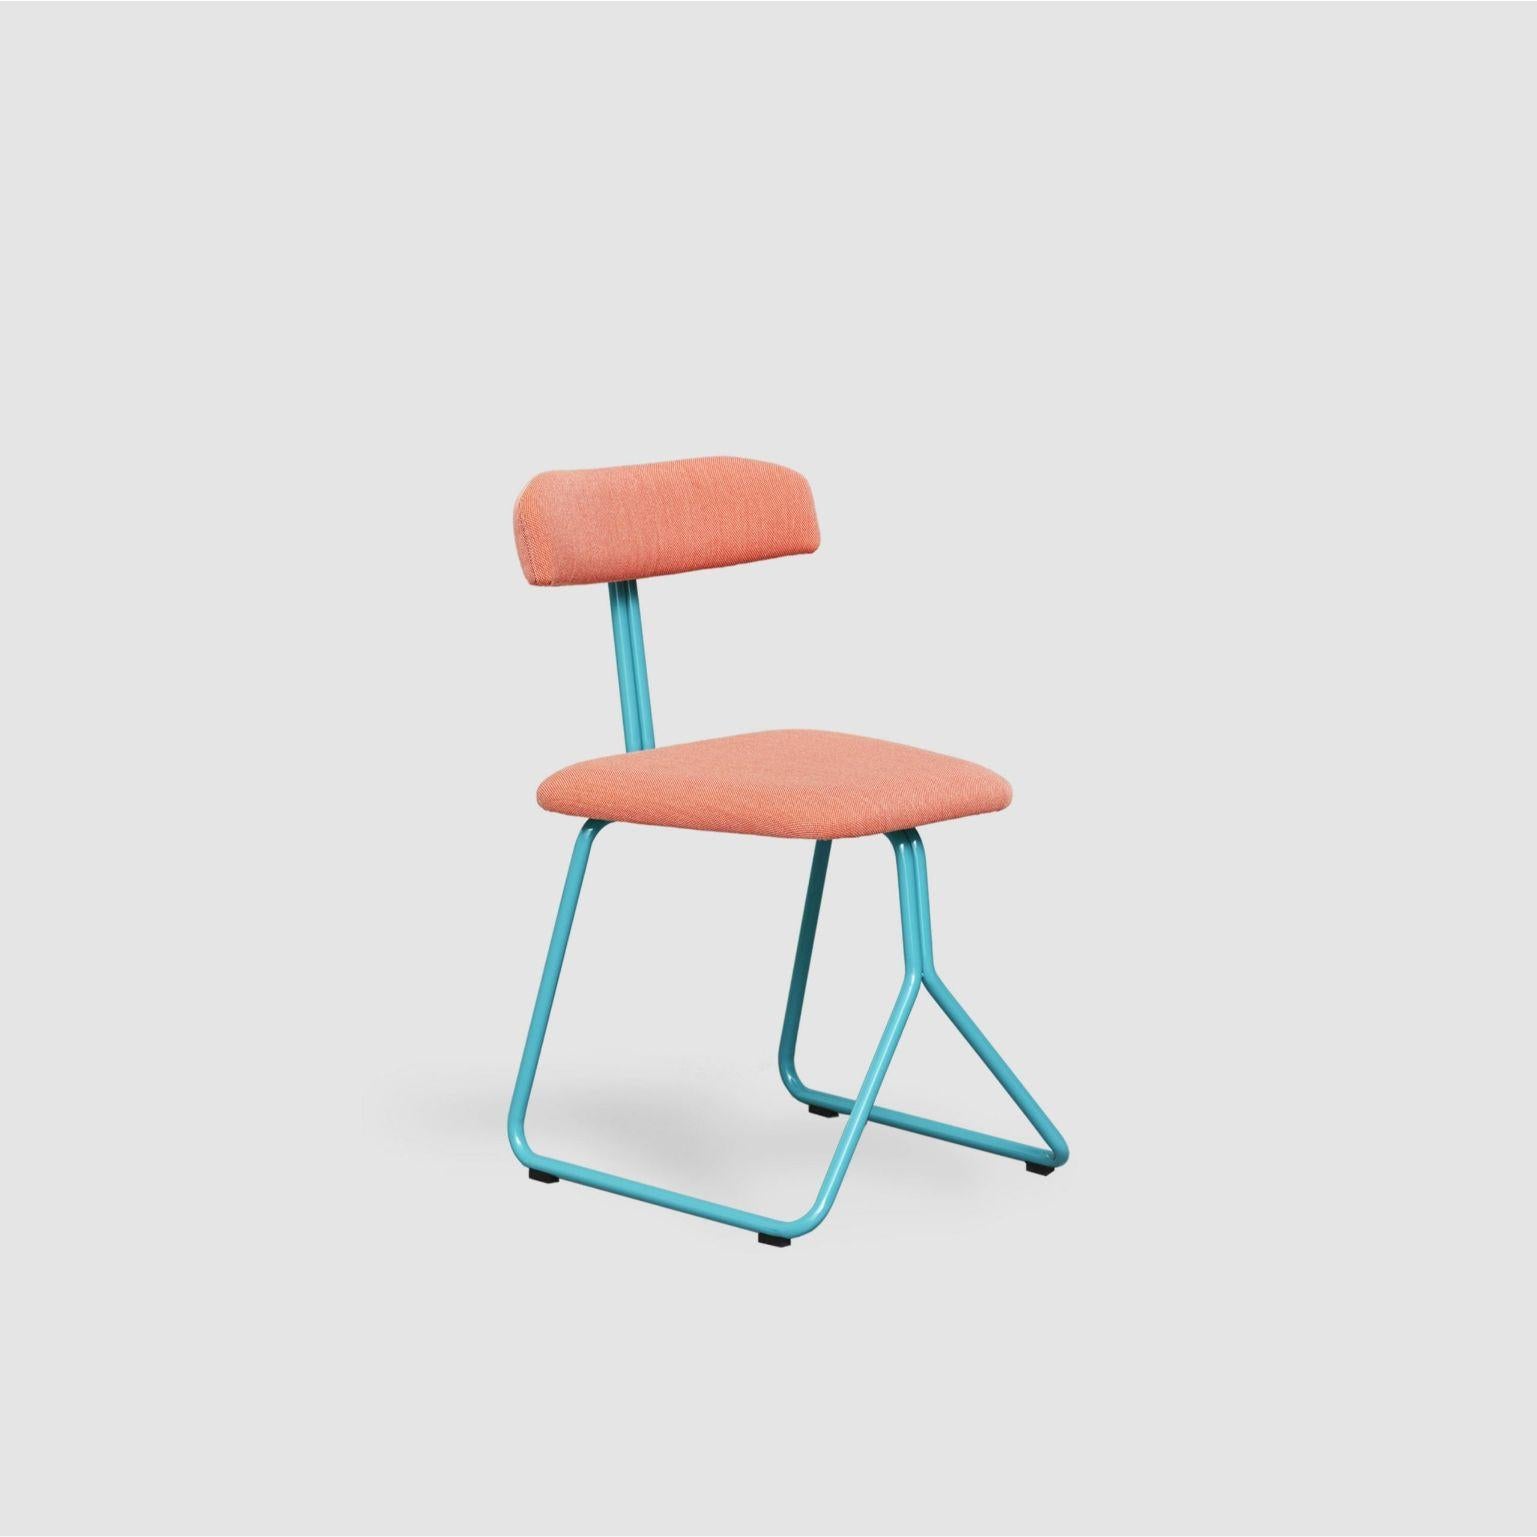 Rider Chair by Pepe Albargues
Dimensions: W 50, D 56, H 82, Seat 48
Materials: Crome plated or painted iron structure
Foam CMHR (high resilience and flame retardant) for all our cushion filling systems

Also available: Different finishes